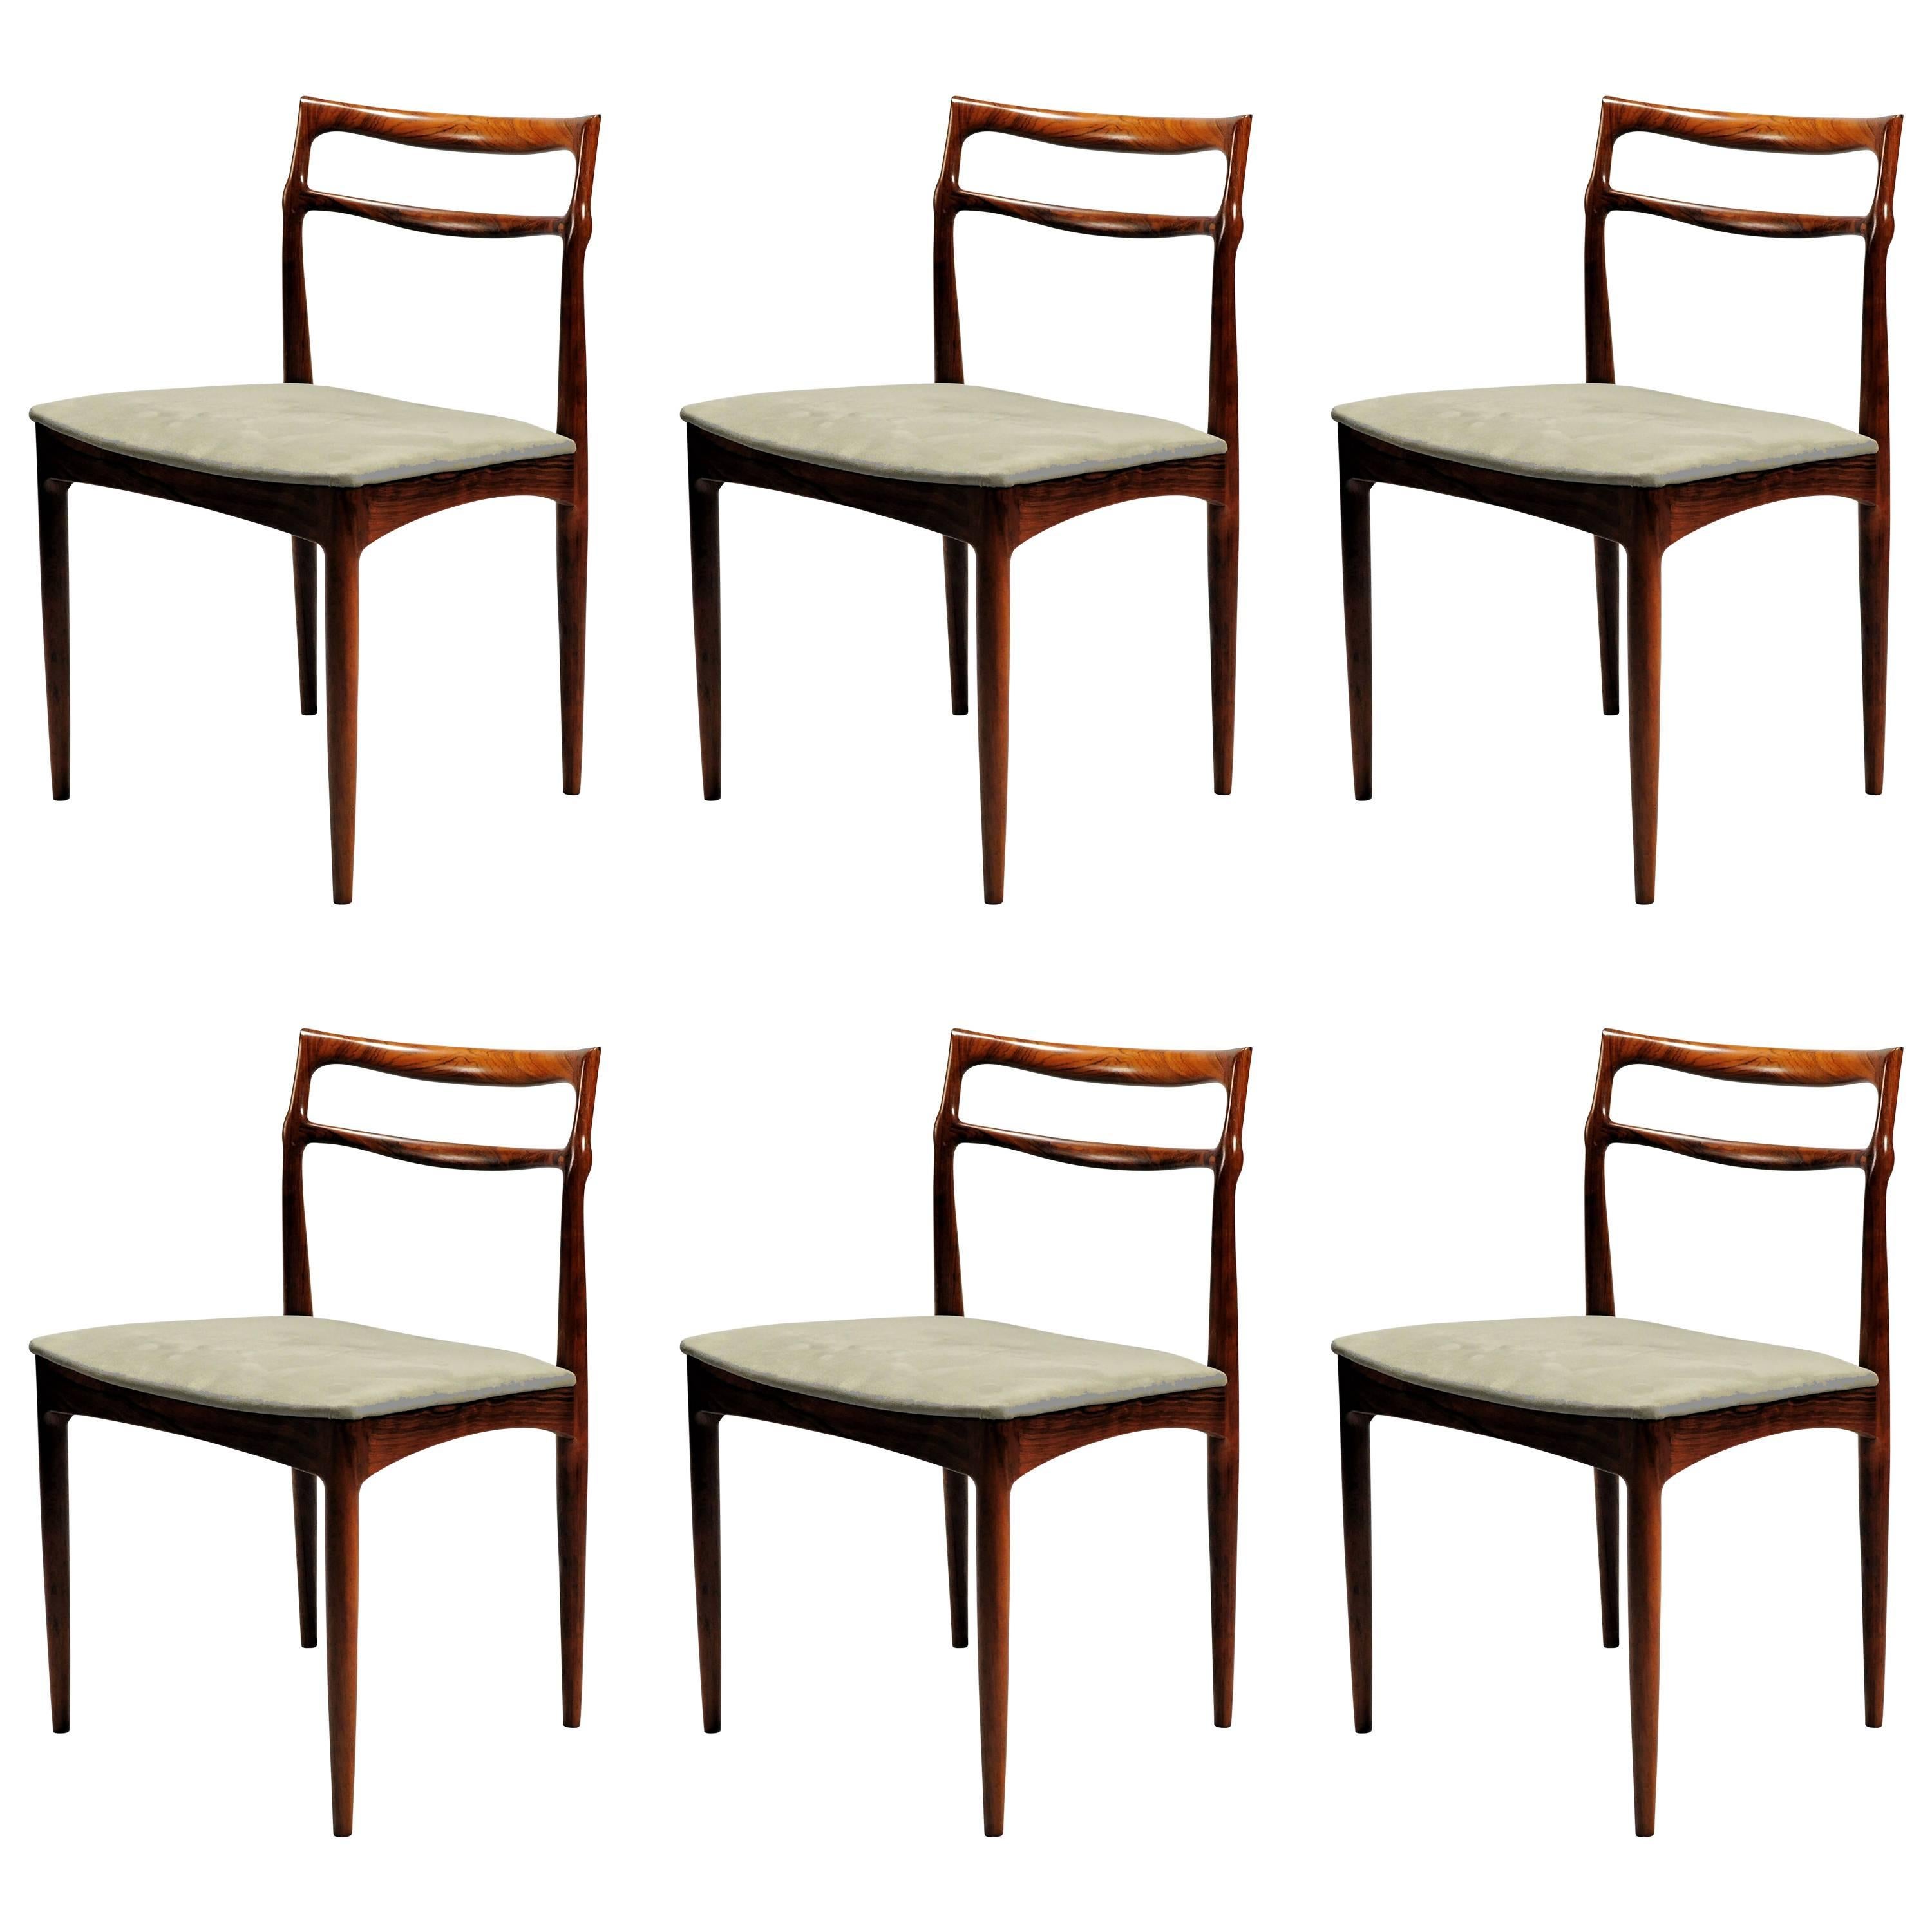 1960s Set of Six Johannes Andersen Chairs in Rosewood and Kvadrat Upholstery